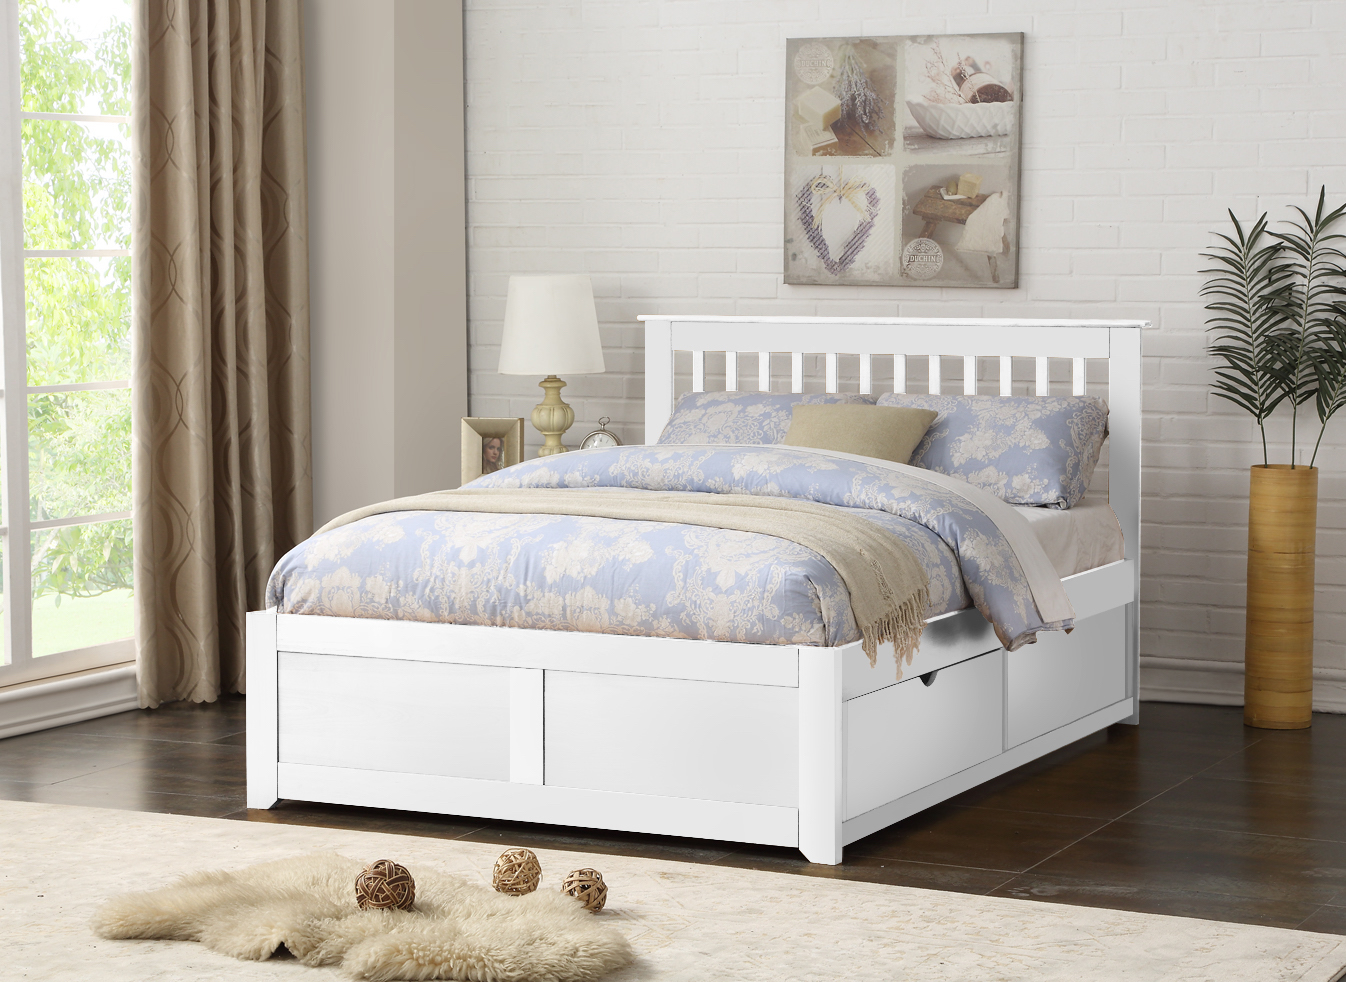 Pentre White Double Storage Bed